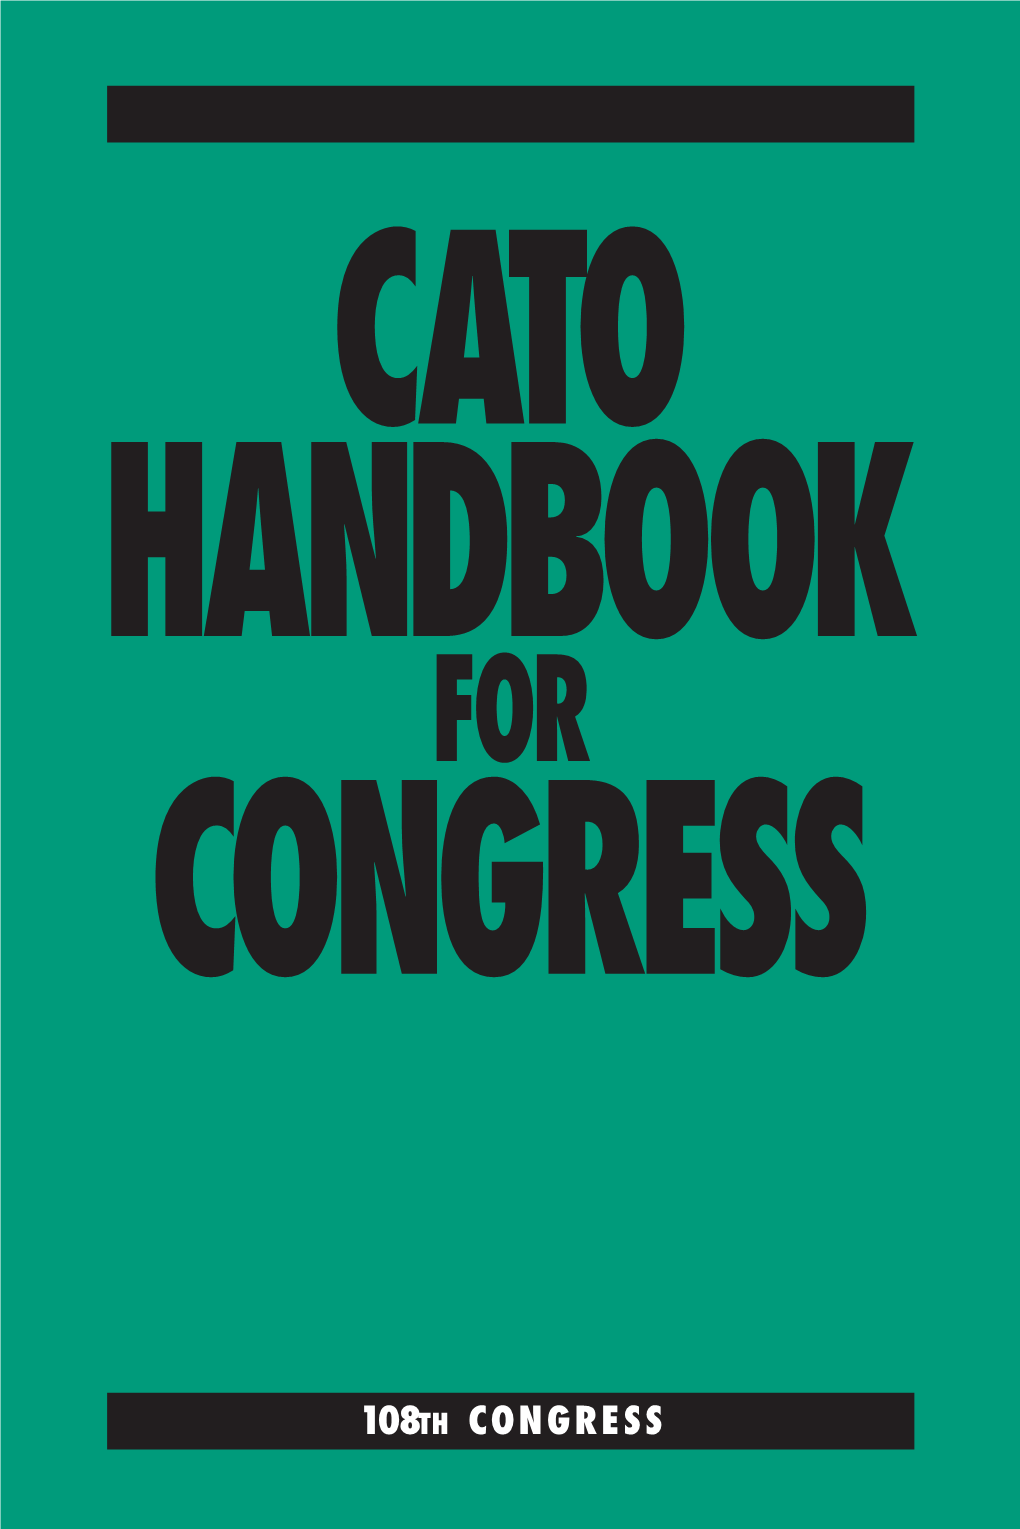 108TH CONGRESS How to Contact the Cato Institute